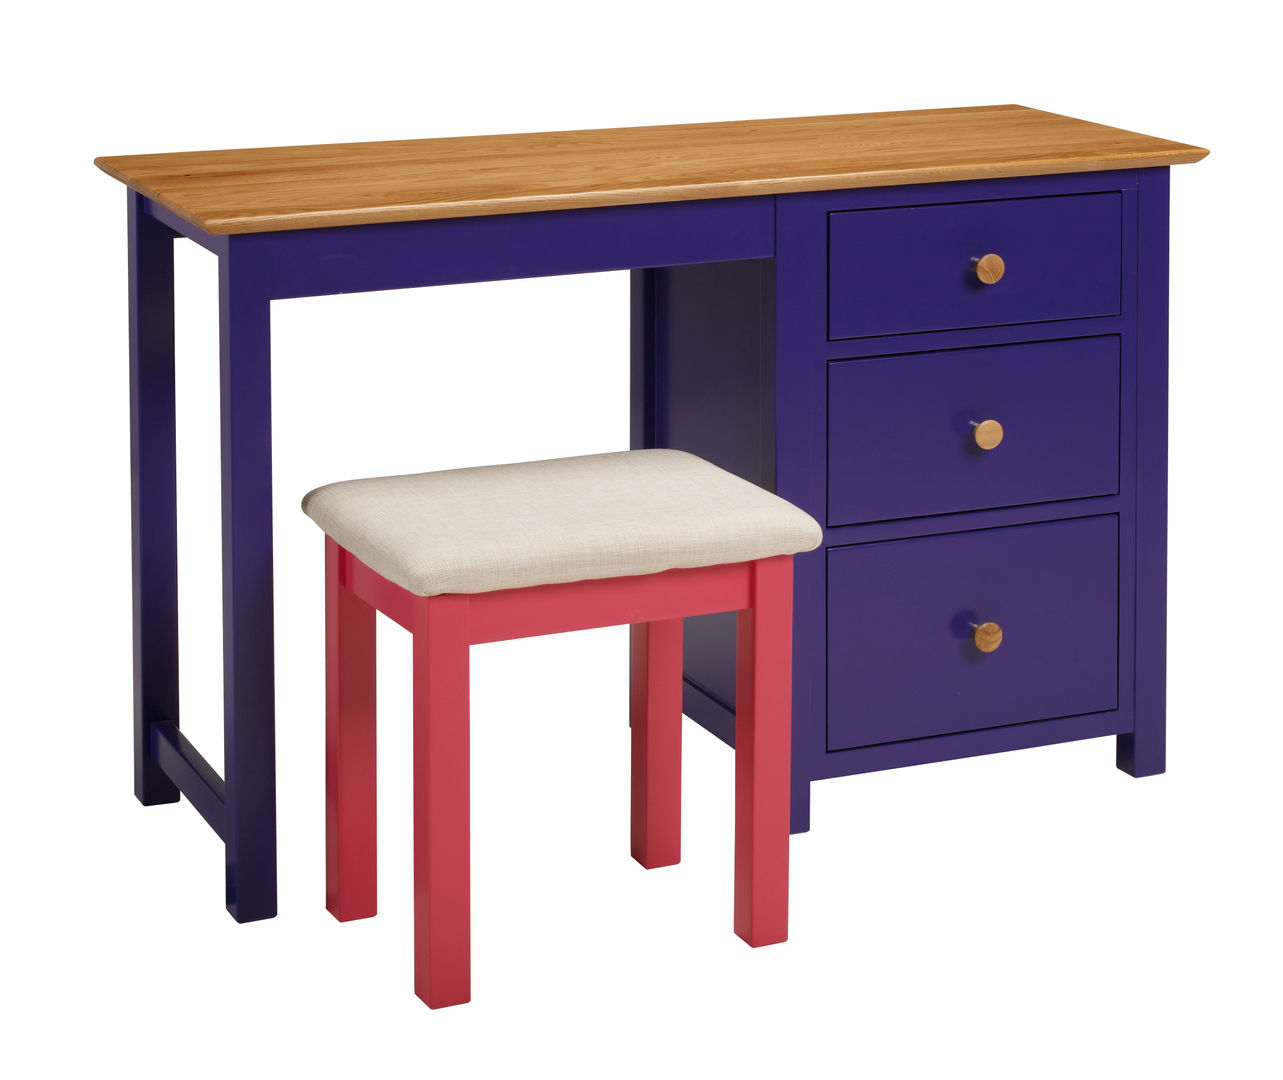 Cotsworld, The Painted Furniture Company The Painted Furniture Company Modern study/office Desks